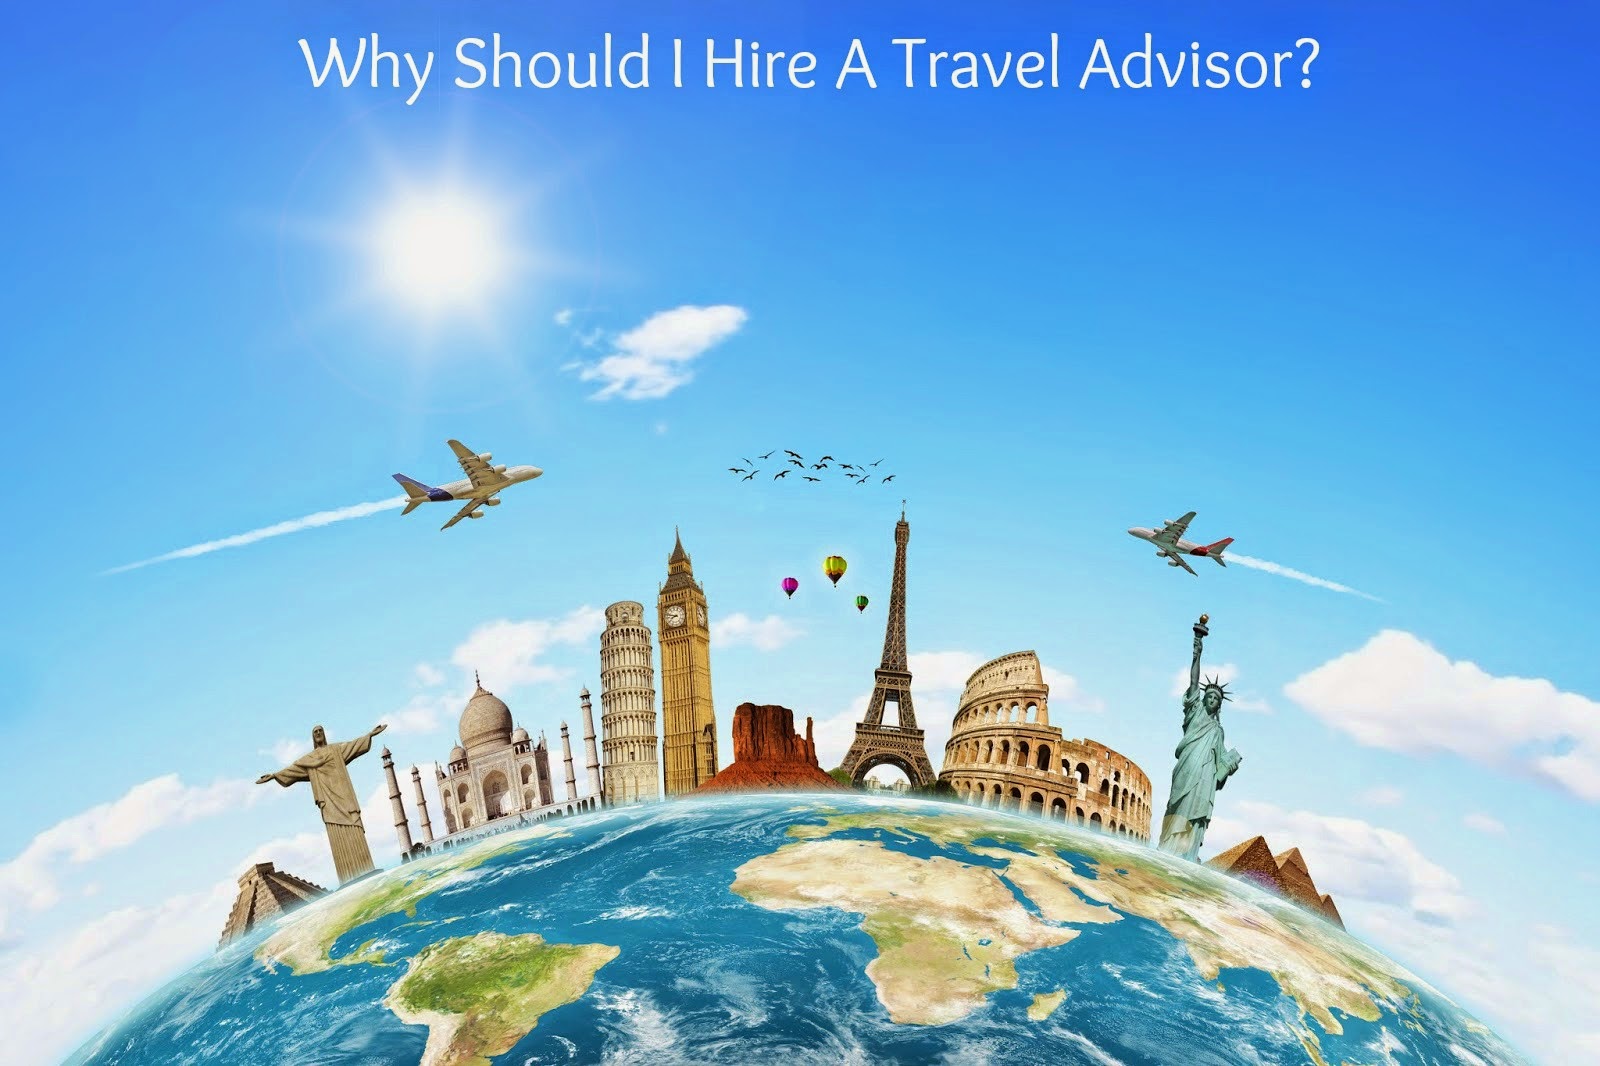 Why NOT Use A Travel Advisor?